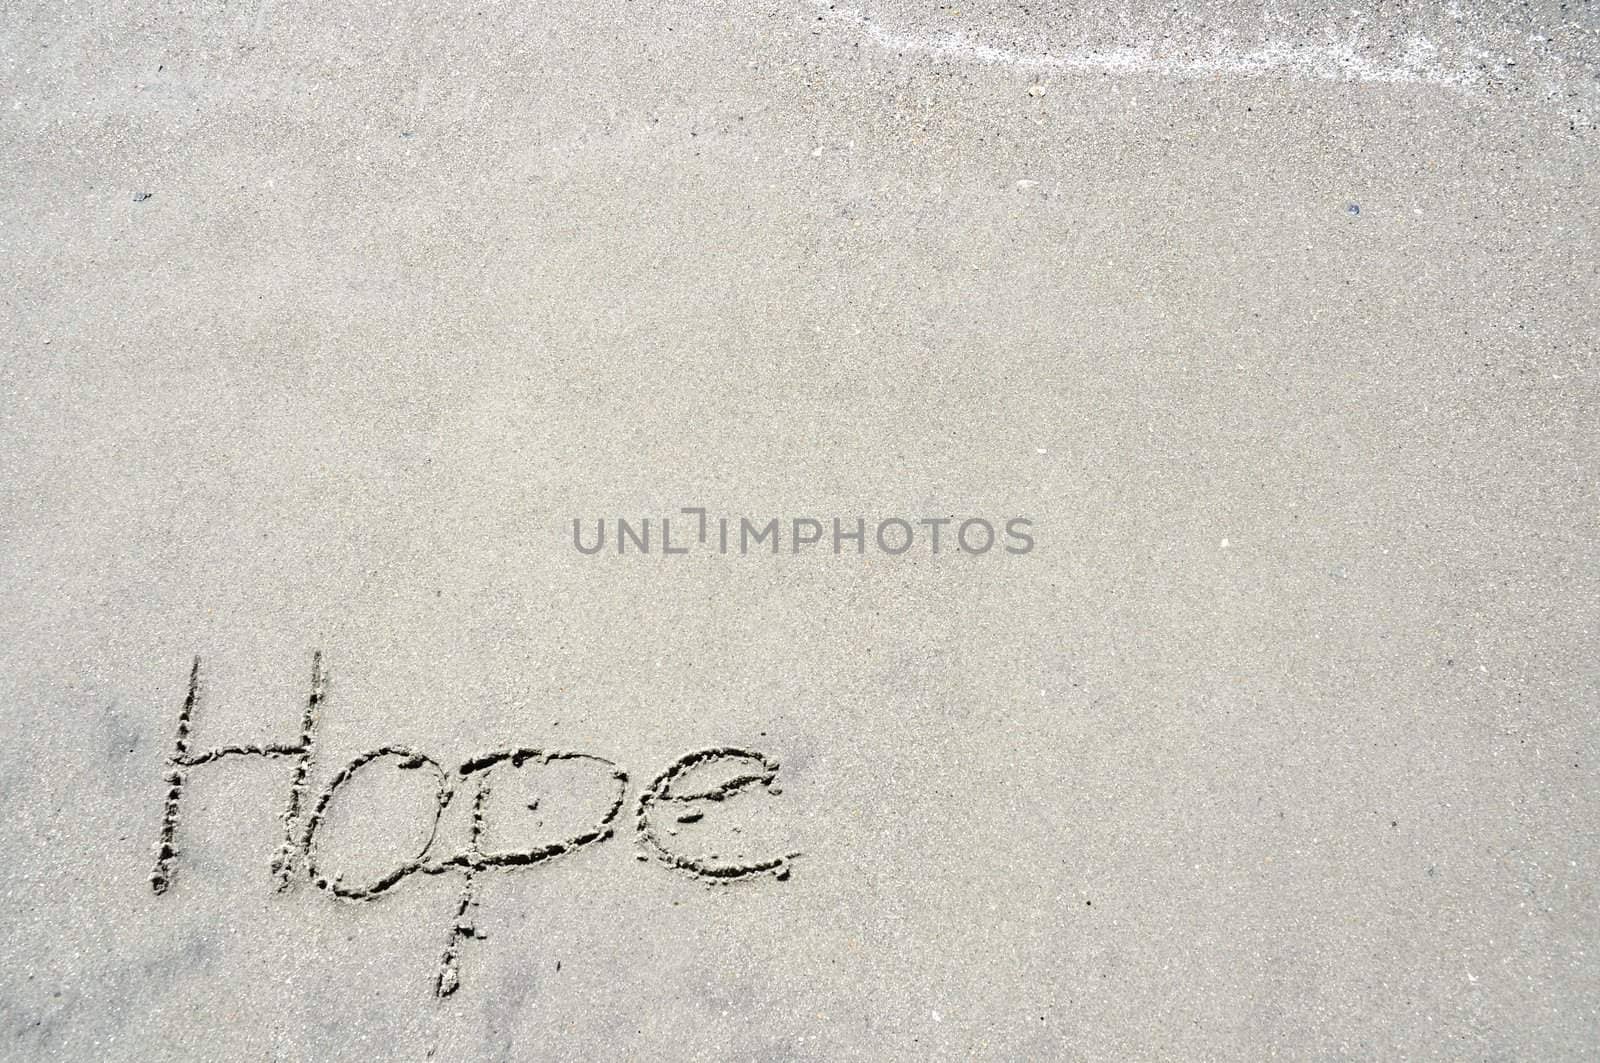 Hope in the sand by RefocusPhoto